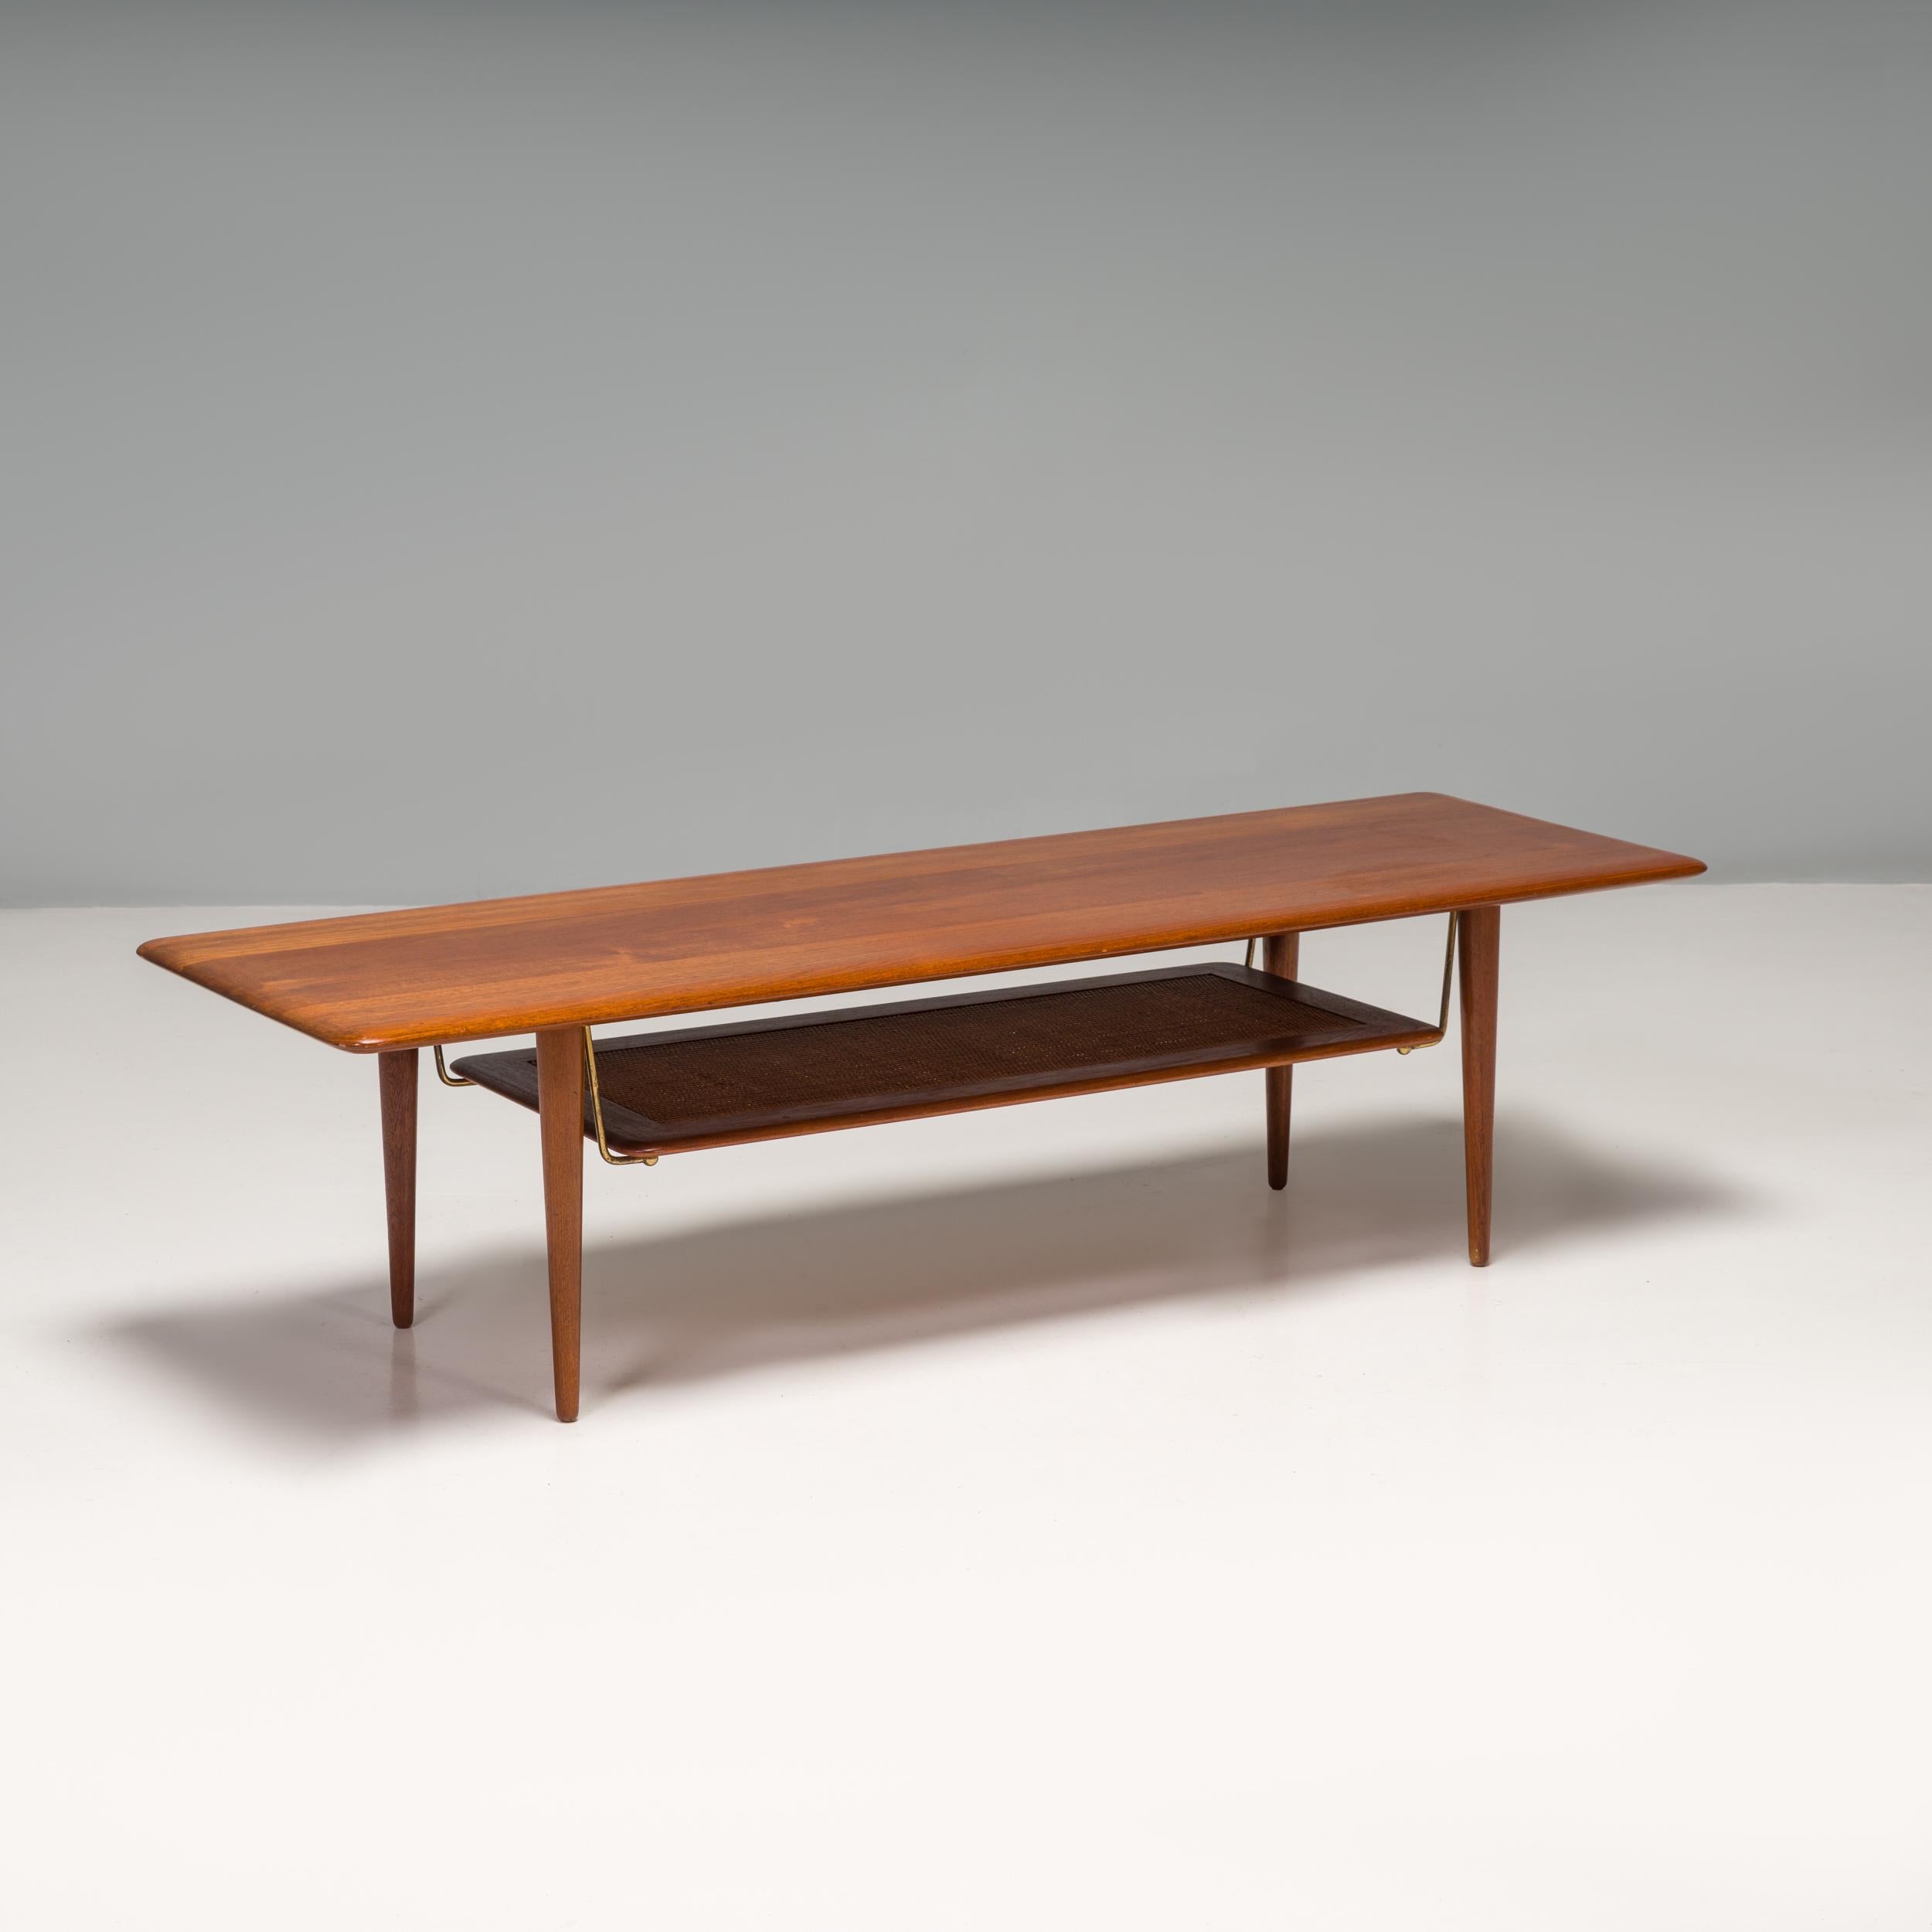 Designed by Peter Hvidt & Orla Mølgaard Nielsen, the FD-516 coffee table was manufactured by France & Søn in Denmark.

Constructed from Teak, the coffee table has a large rectangular table top with curved corners, sitting on tapered cone